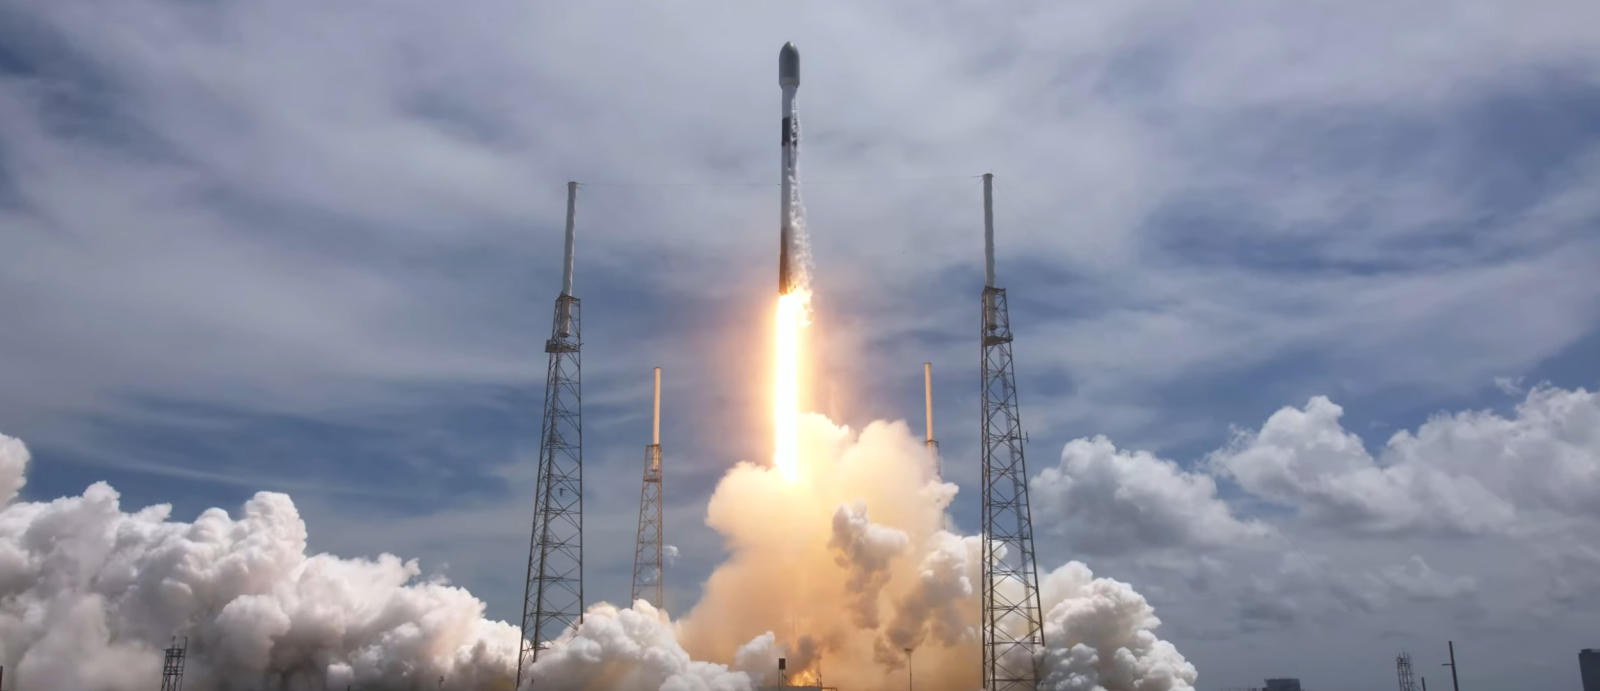 Spacex launches the Transporter-5 mission carrying 59 payloads, including Lincoln Laboratory’s Agile MicroSat. (Photo: SpaceX)